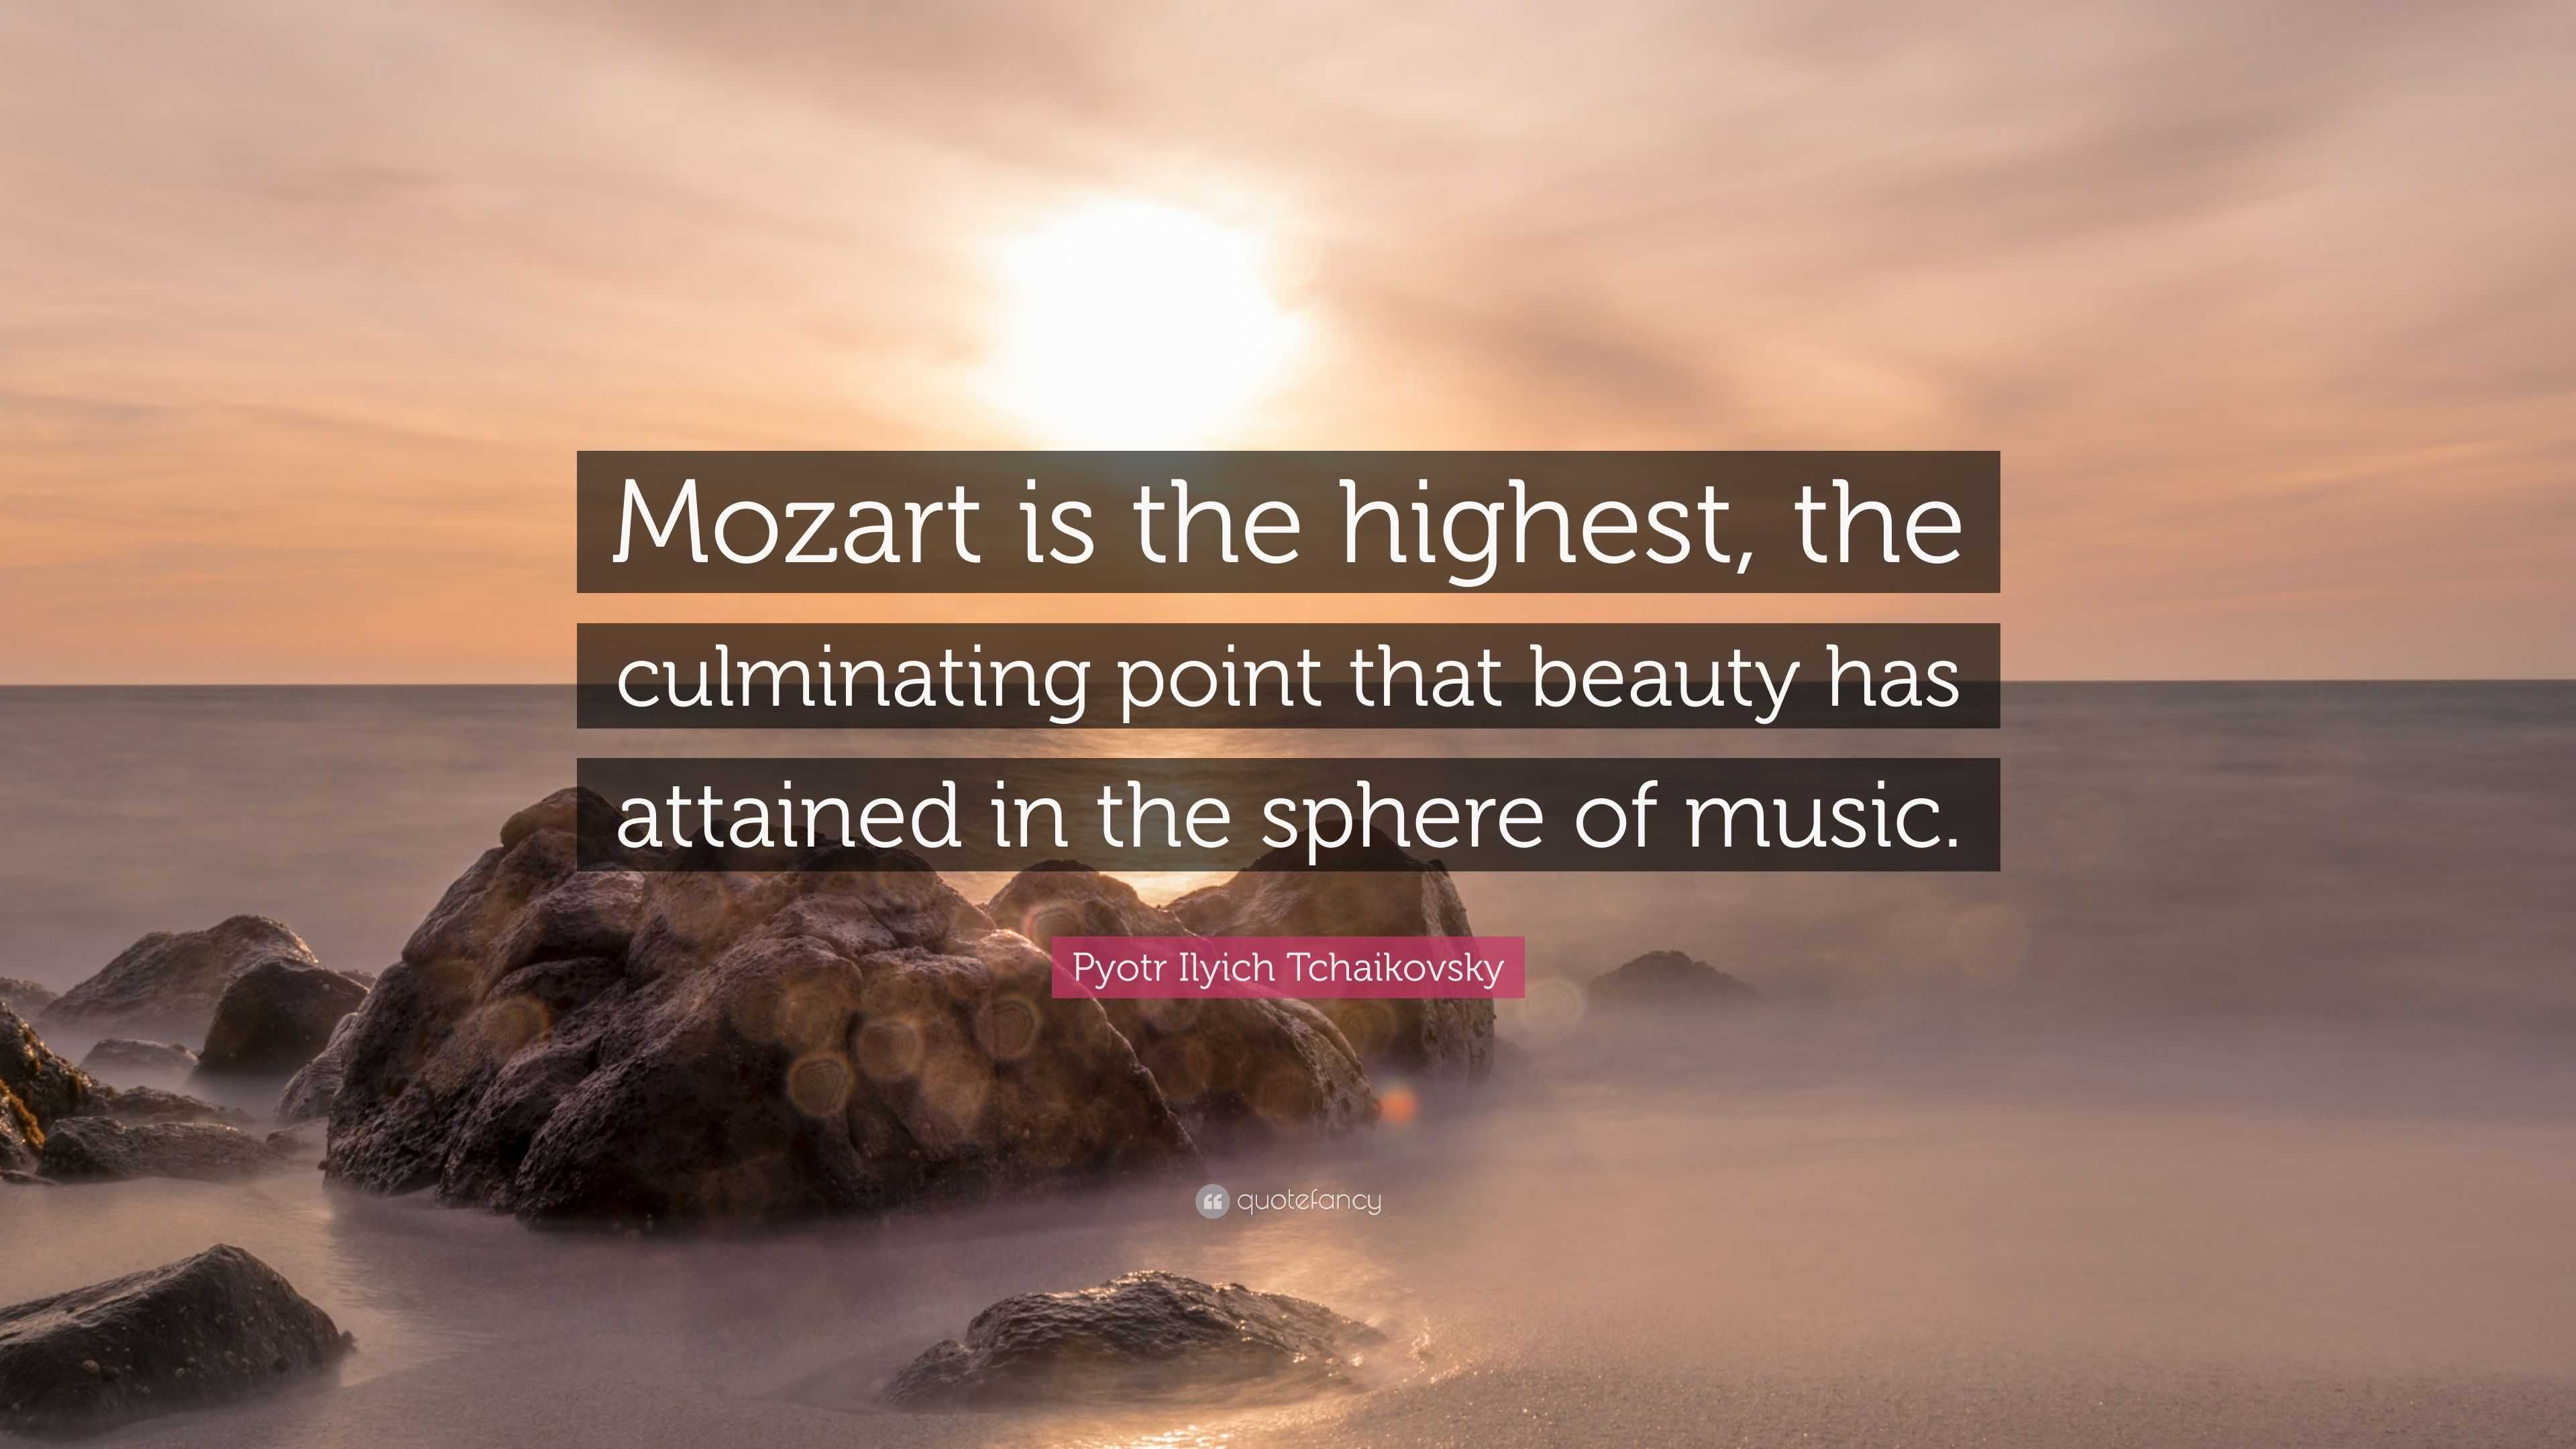 Pyotr Ilyich Tchaikovsky Quote: “Mozart is the highest, the culminating ...